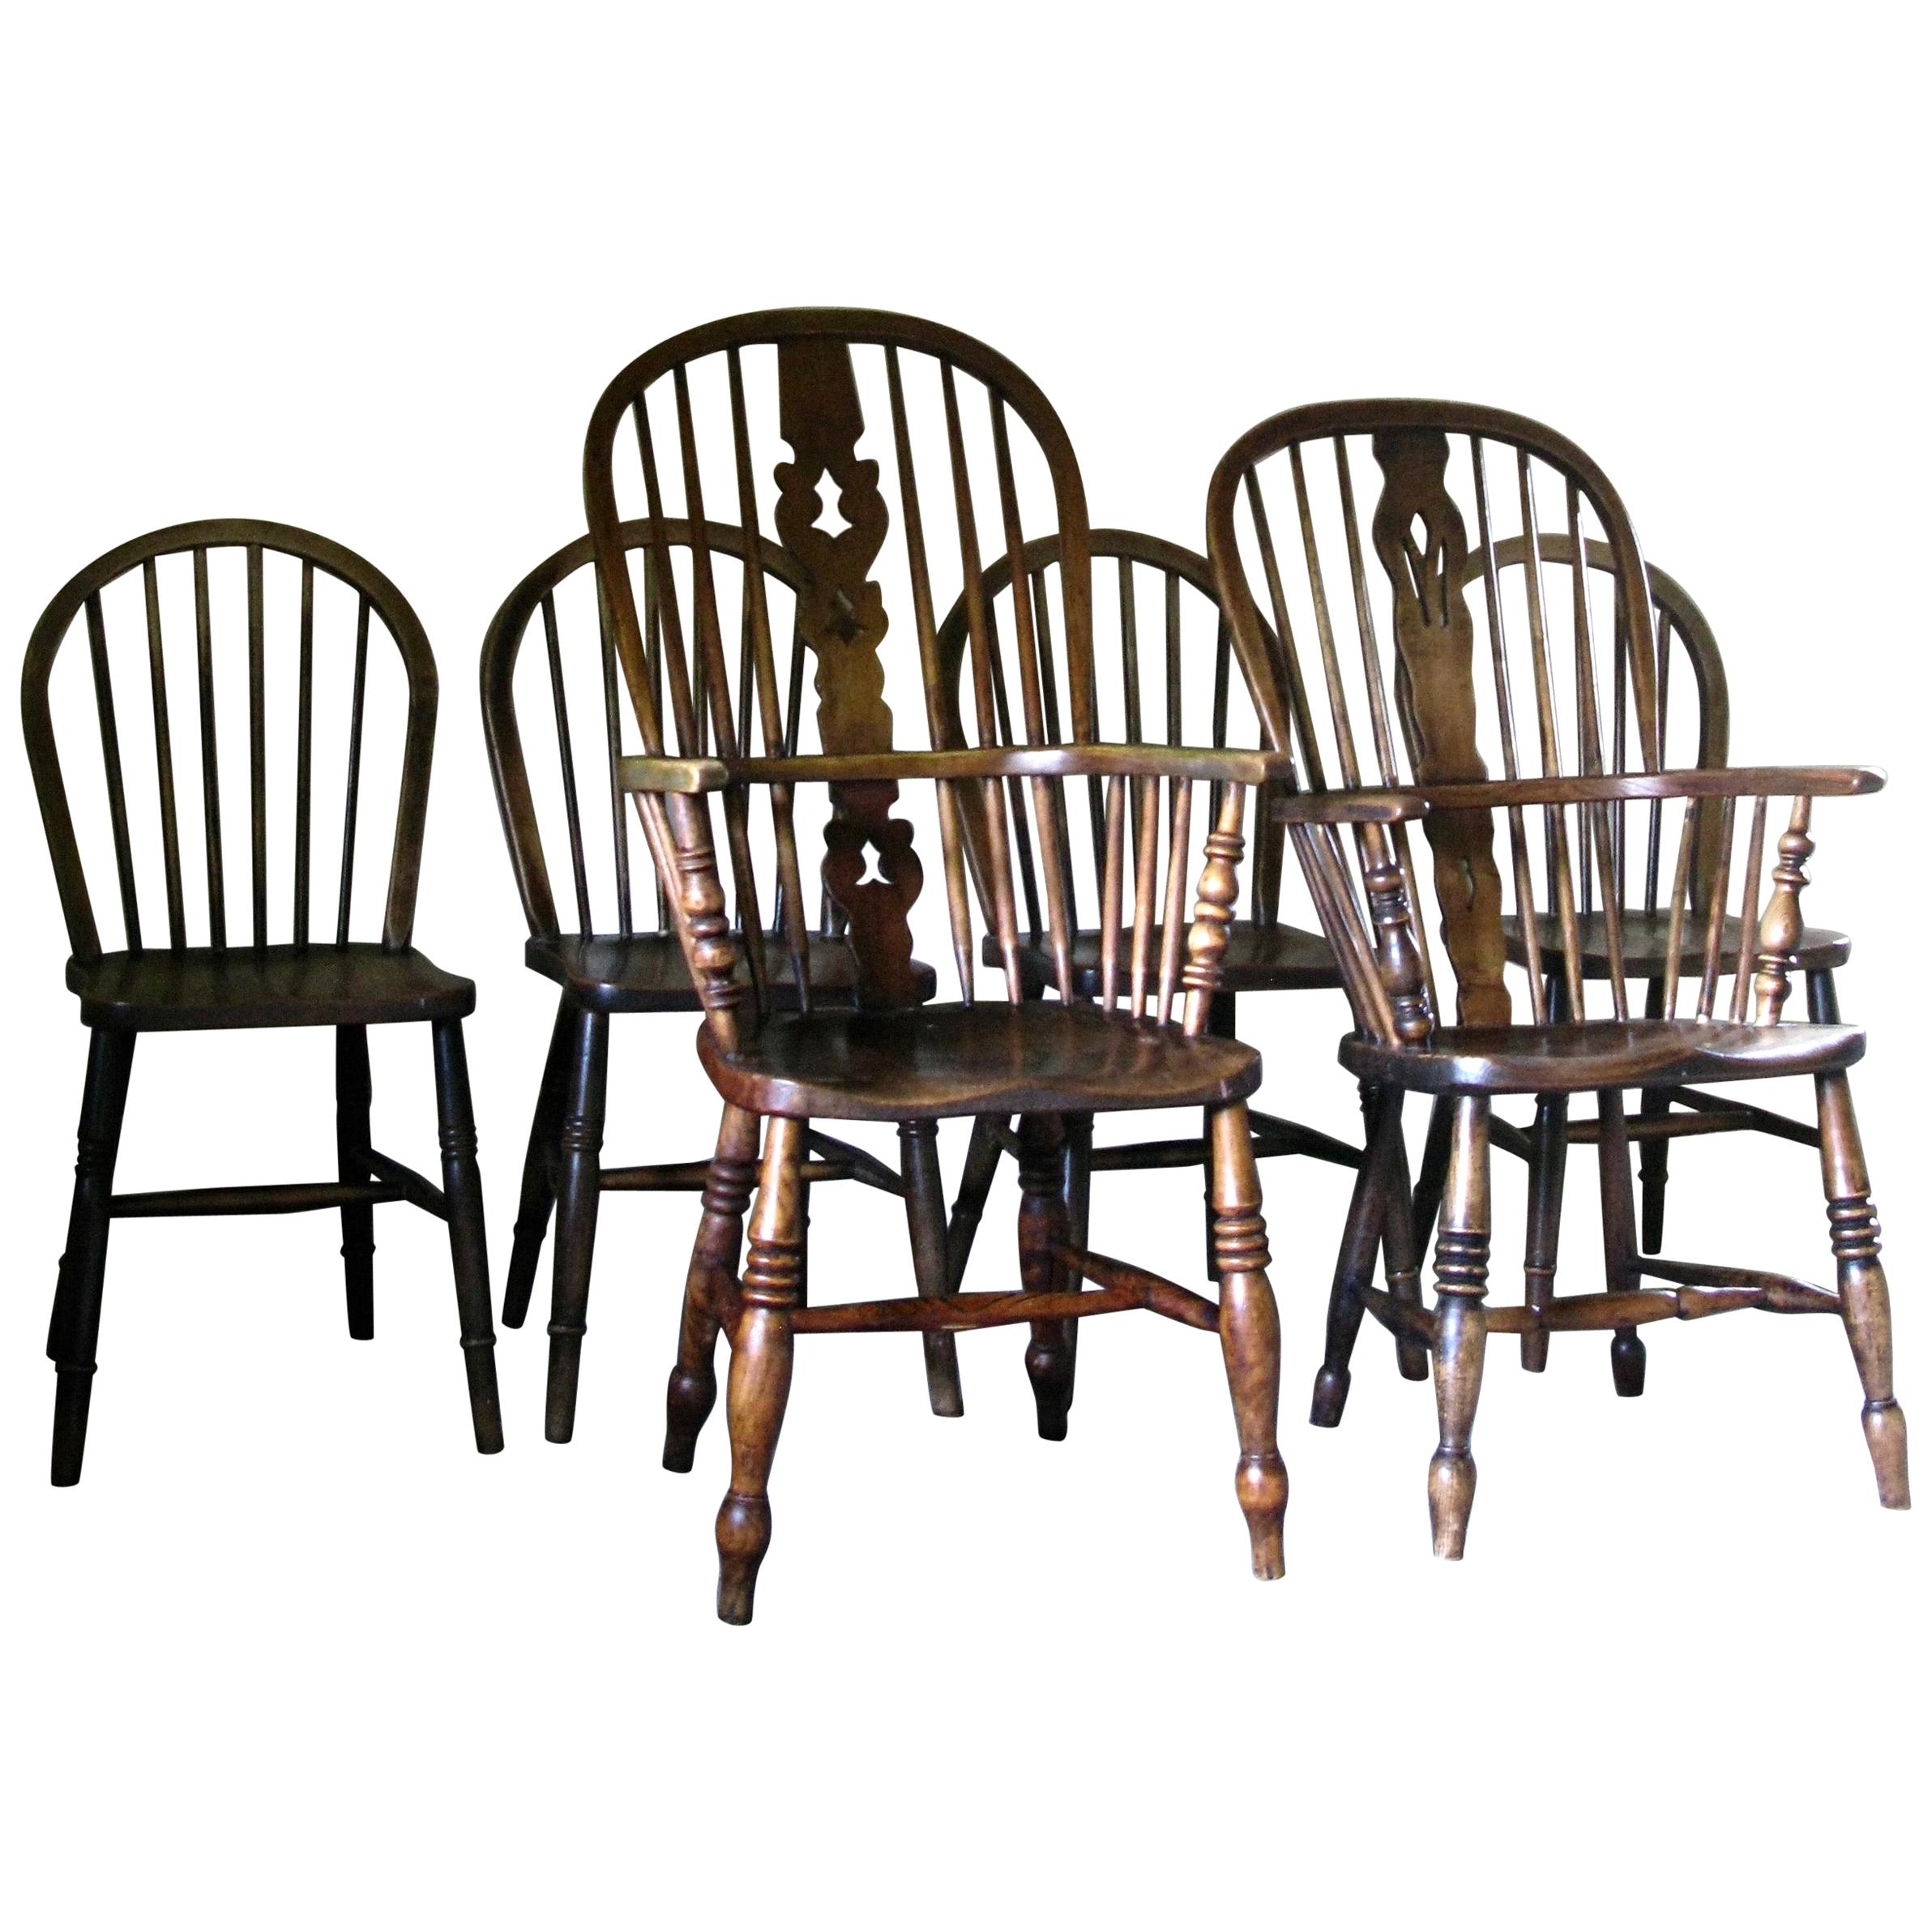 Set of 6 Windso Chairs 6 Dining Chairs, English, Antique Dining Chairs